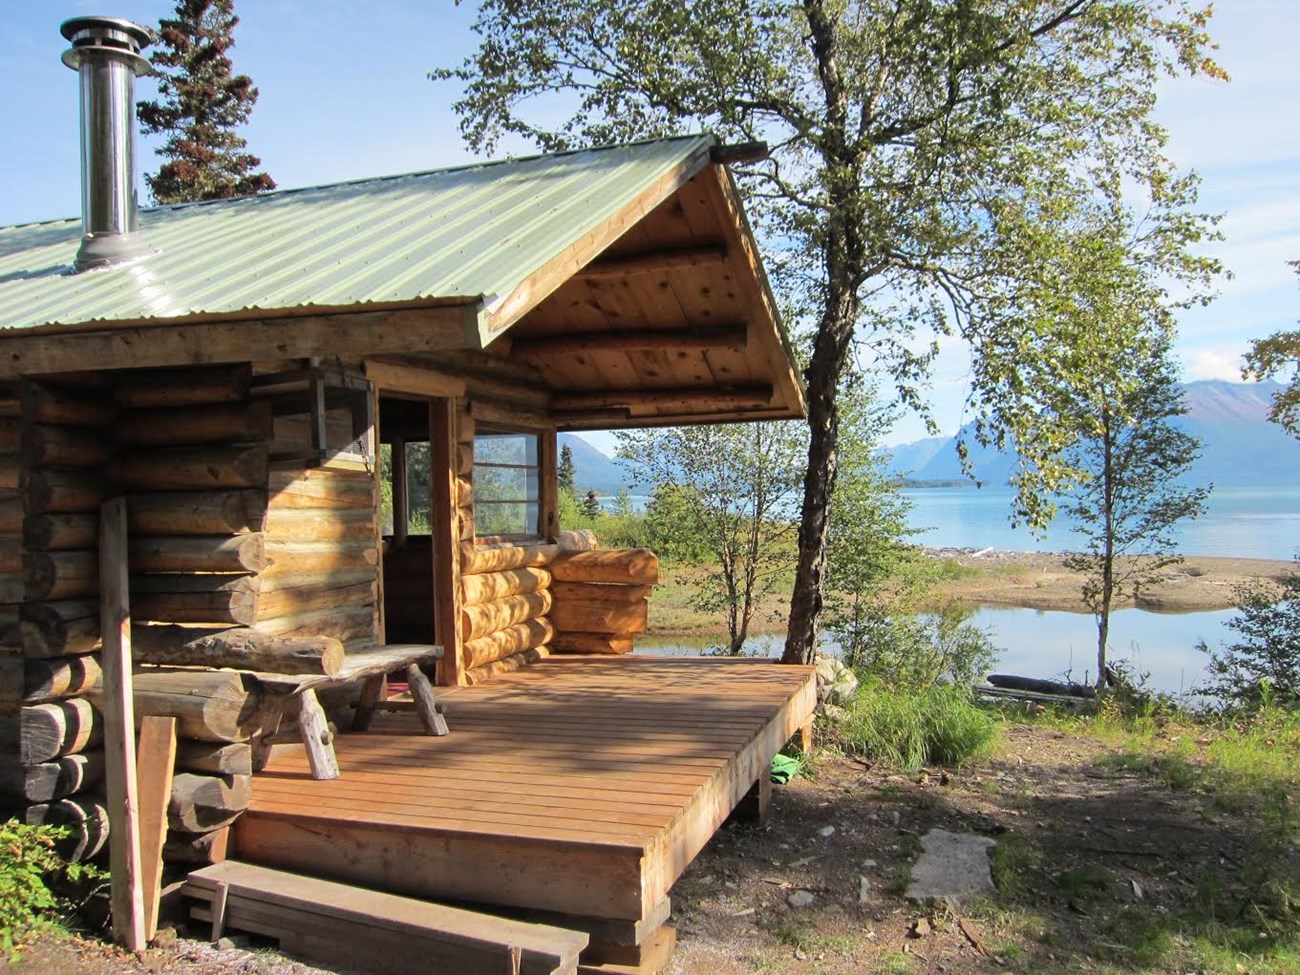 A wooden cabin with a porch is backdropped by water and mountains